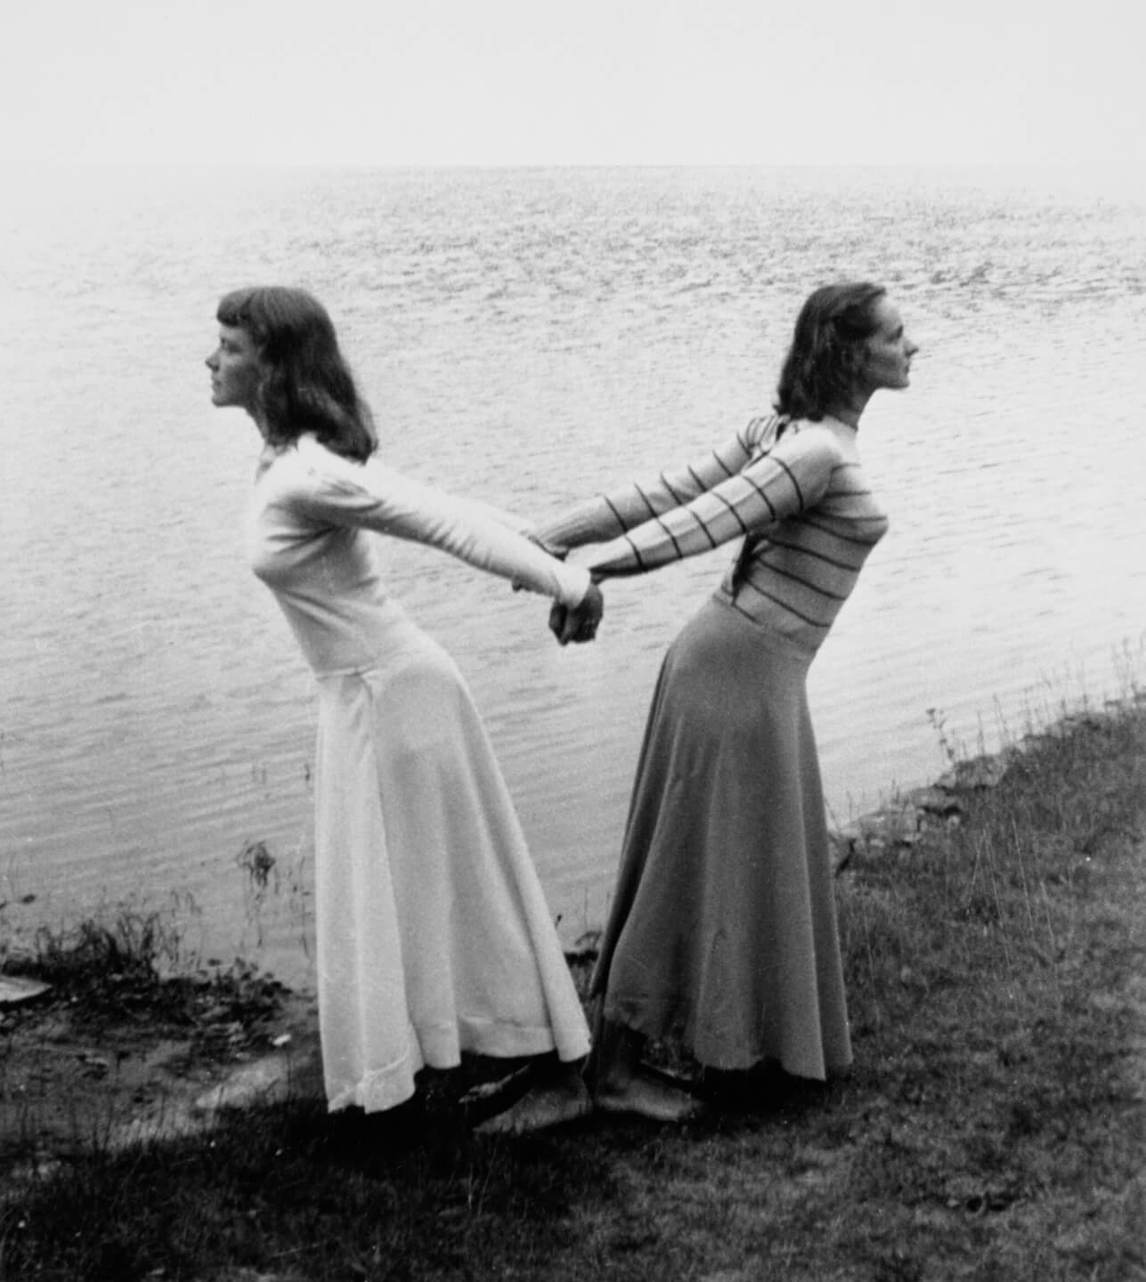 Françoise Sullivan and Jeanne Renaud in Duality (Dualité), 1948. Photograph by Arthur Renaud.